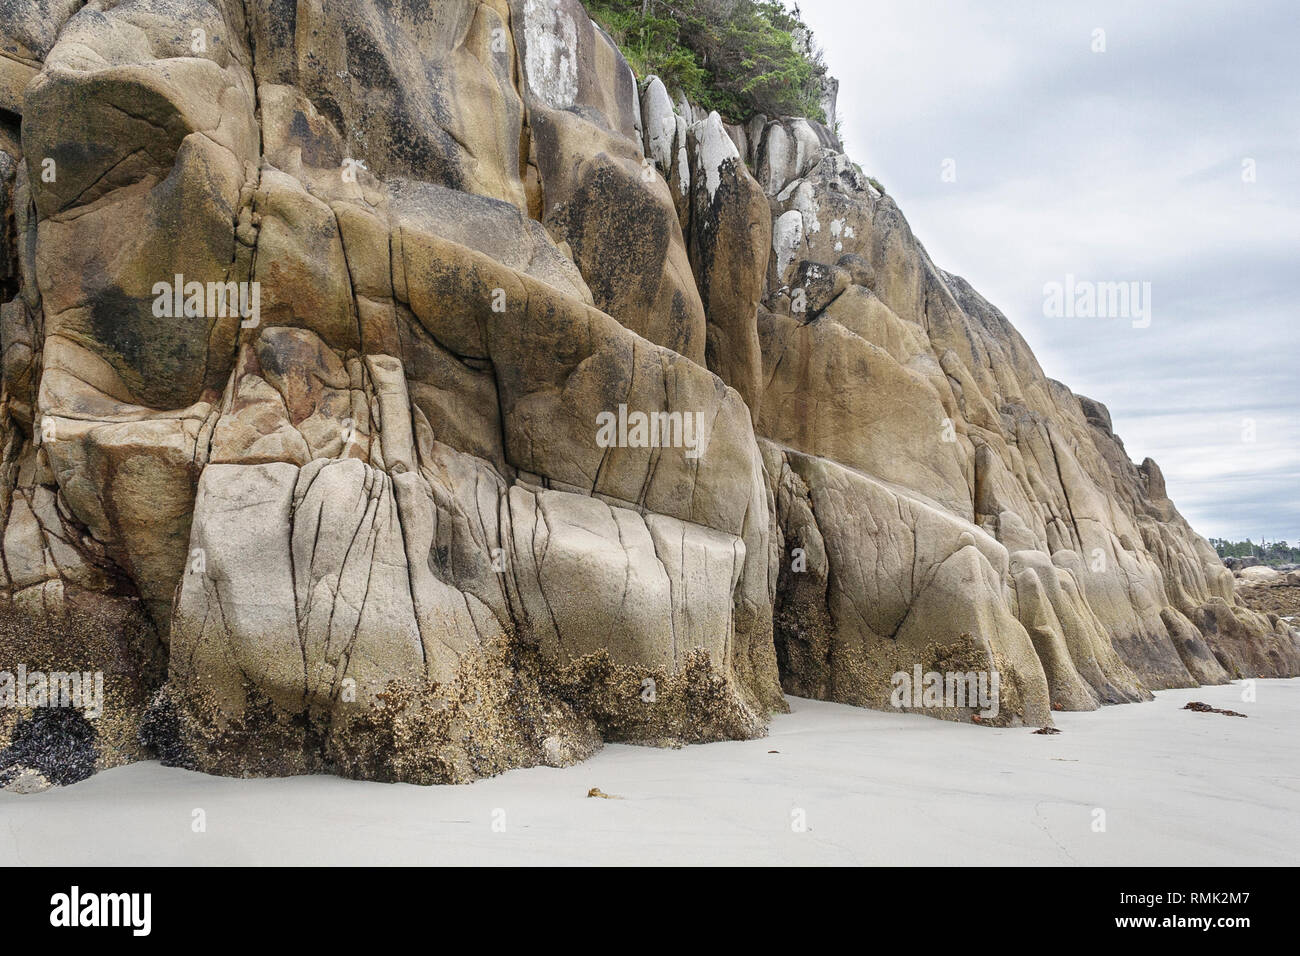 Eroded granite bluffs rise steeply at the edge of a sandy beach on the exposed outer shore of CalvertIisland, on British Columbia's Central Coast. Stock Photo